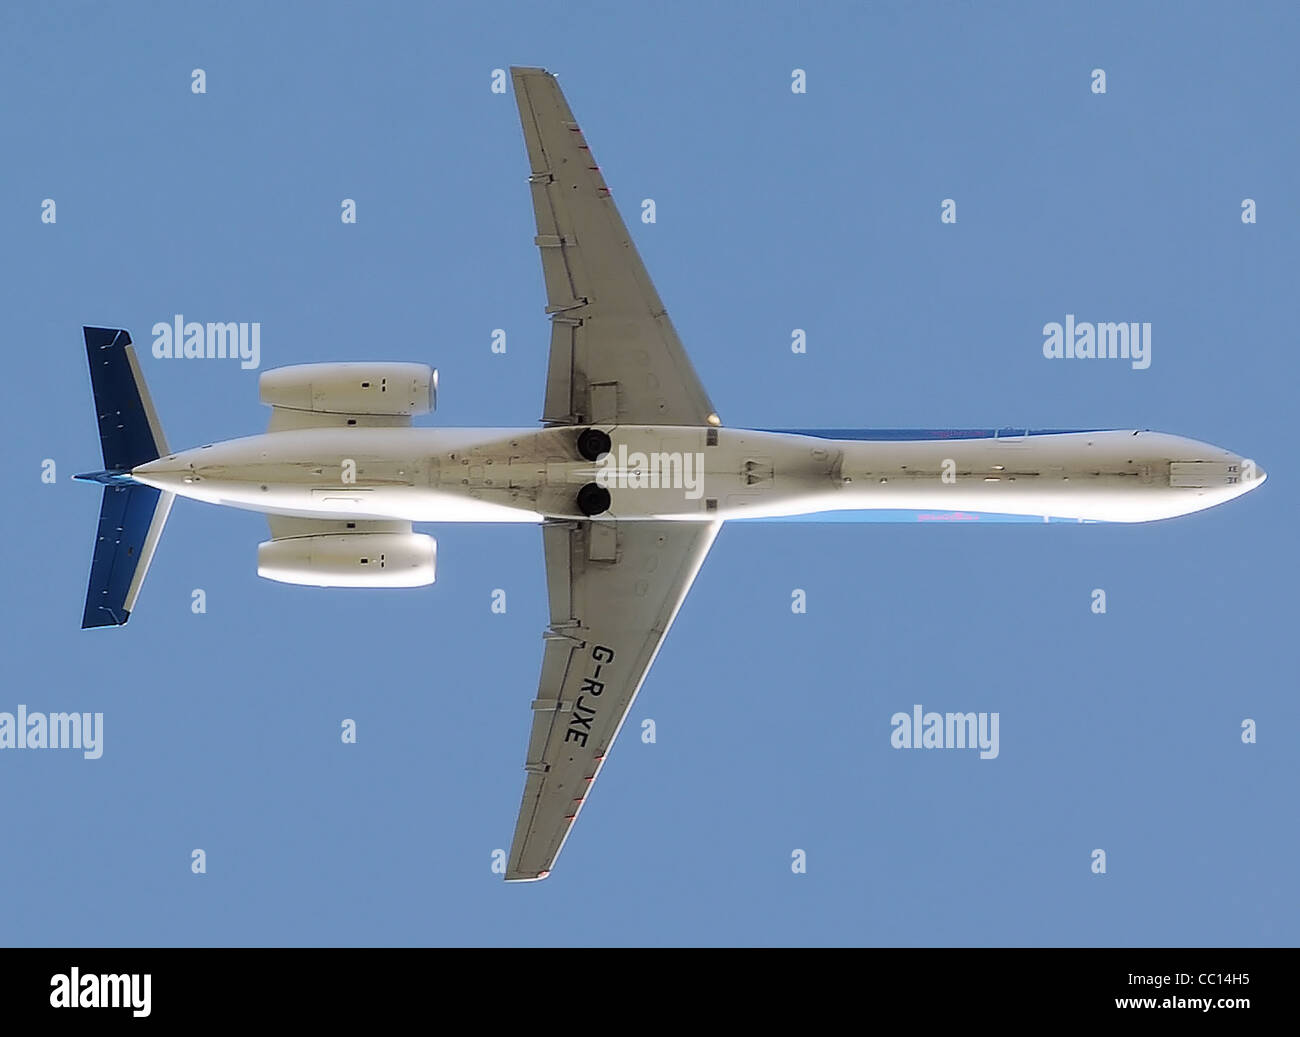 bmi Embraer ERJ 145 (G-RJXE) takes off from London Heathrow Airport, England Stock Photo